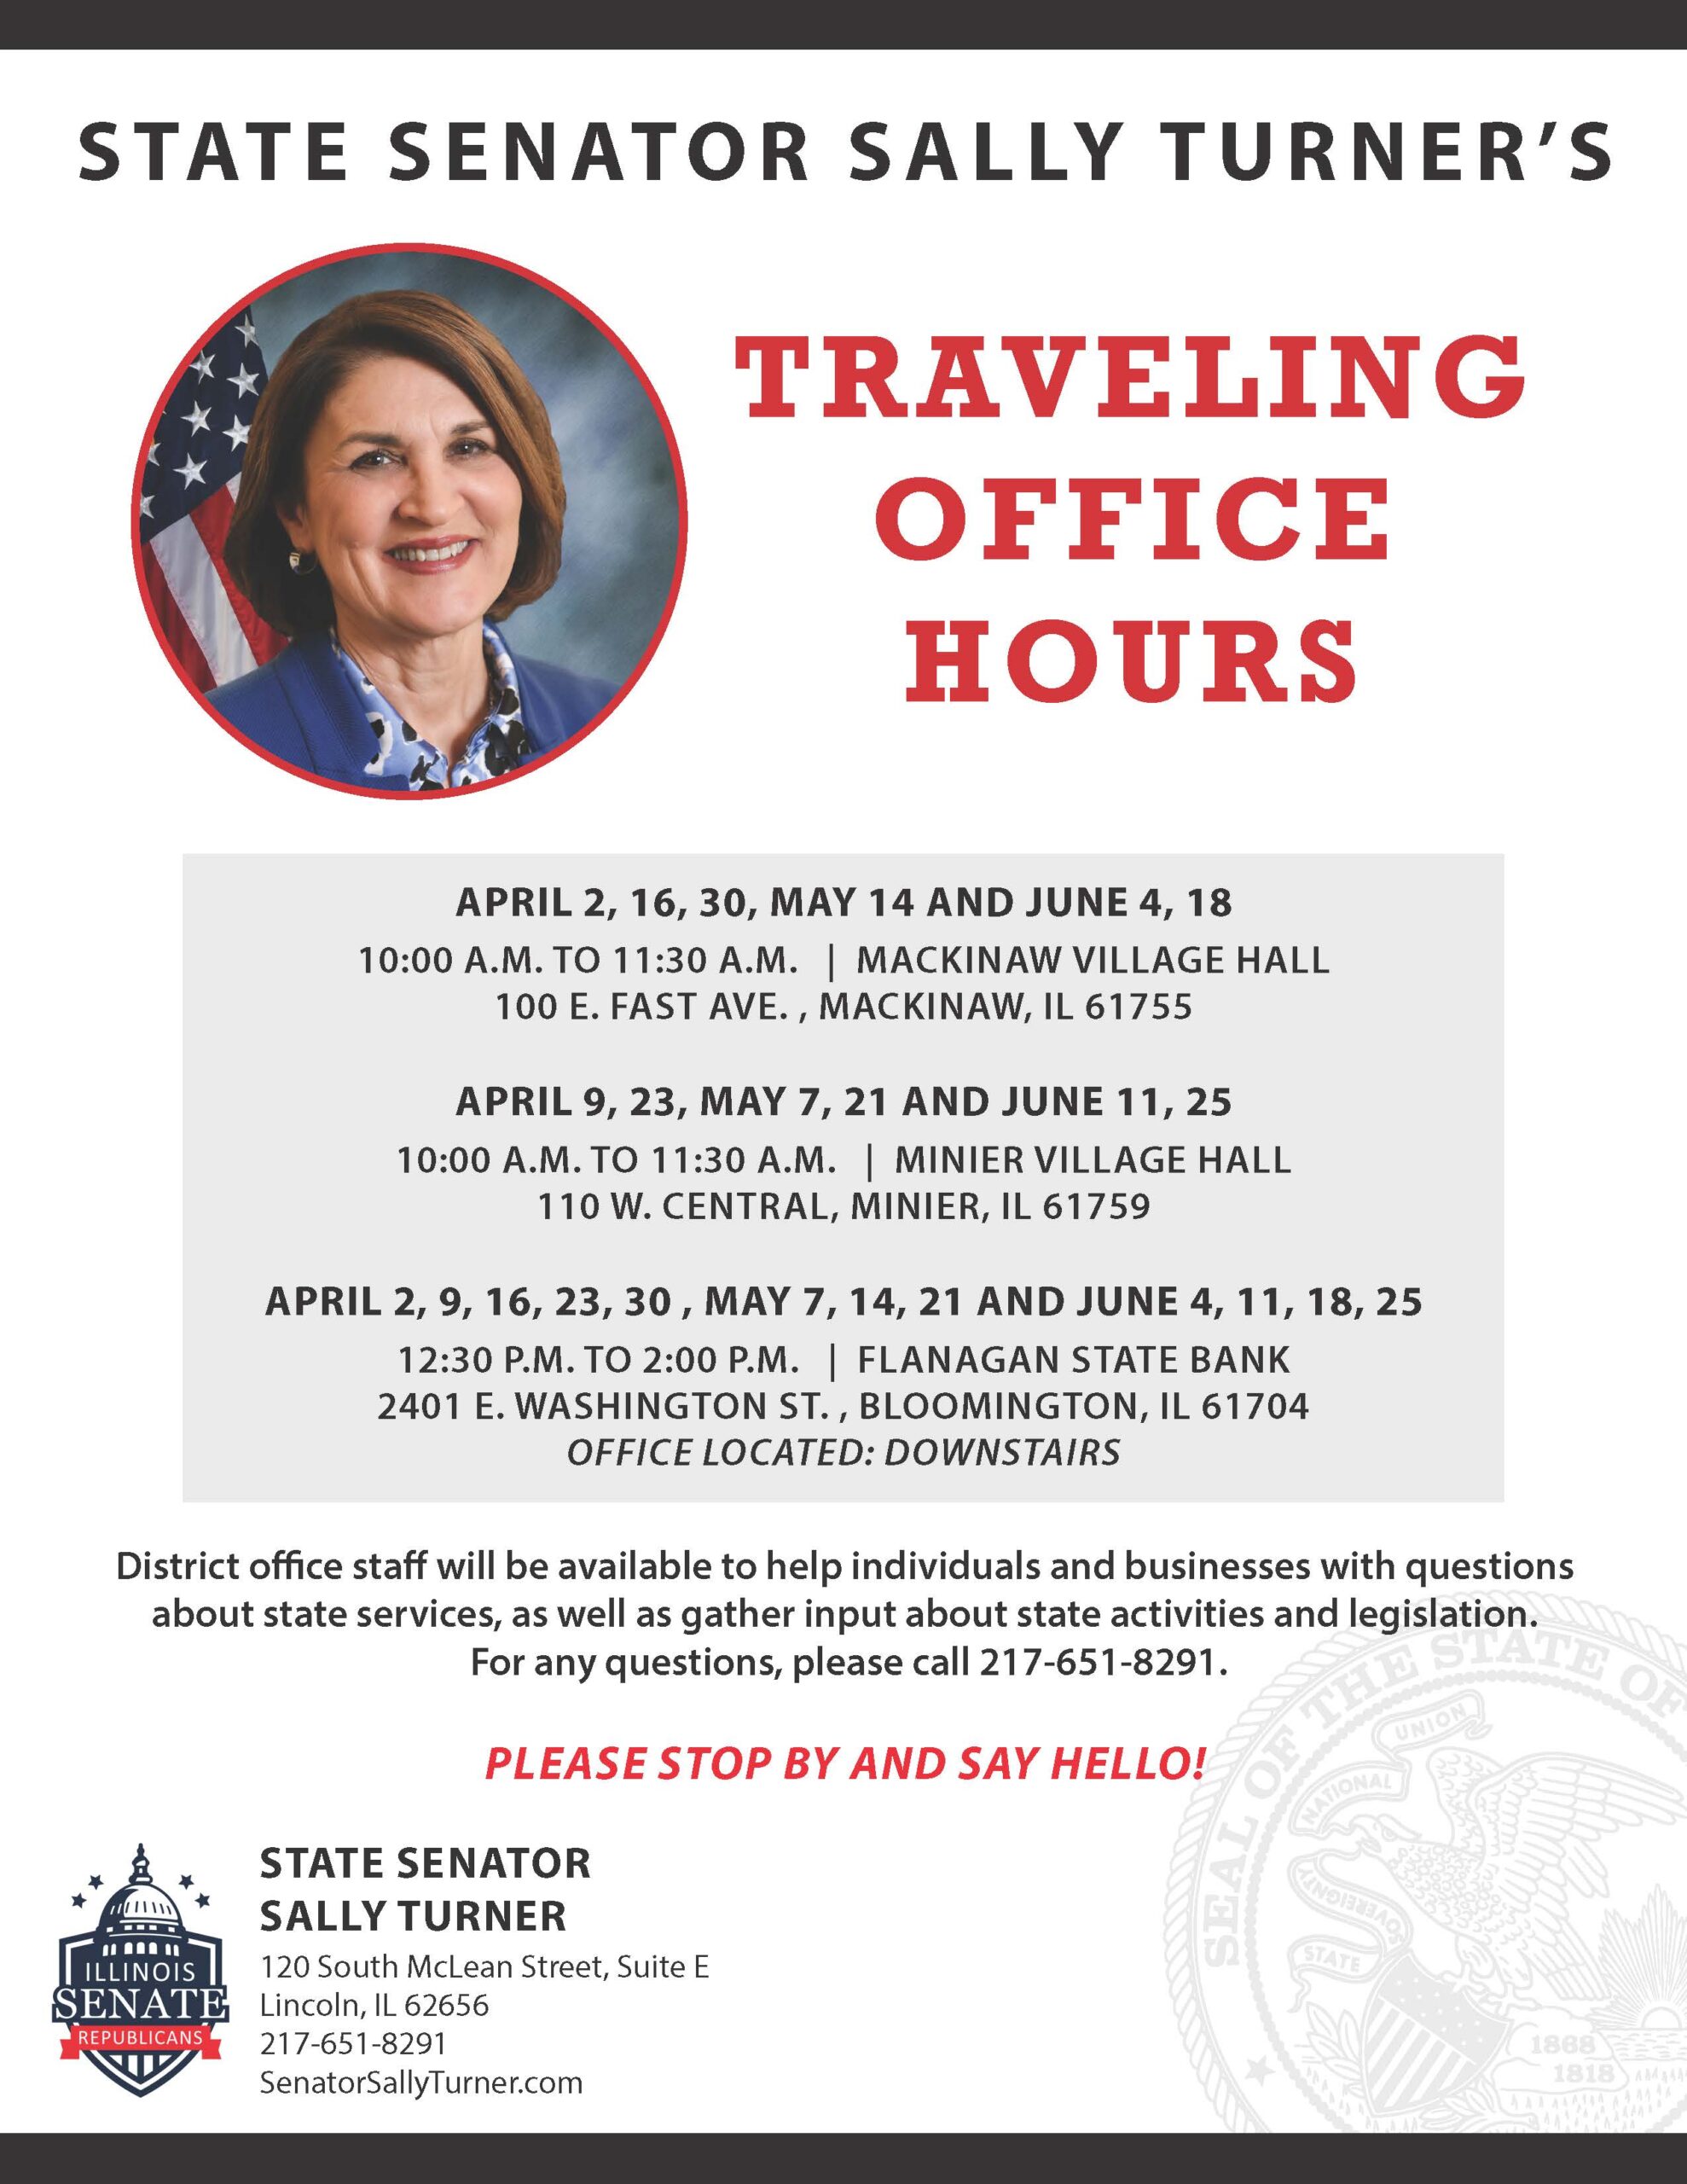 Upcoming Traveling Office Hours